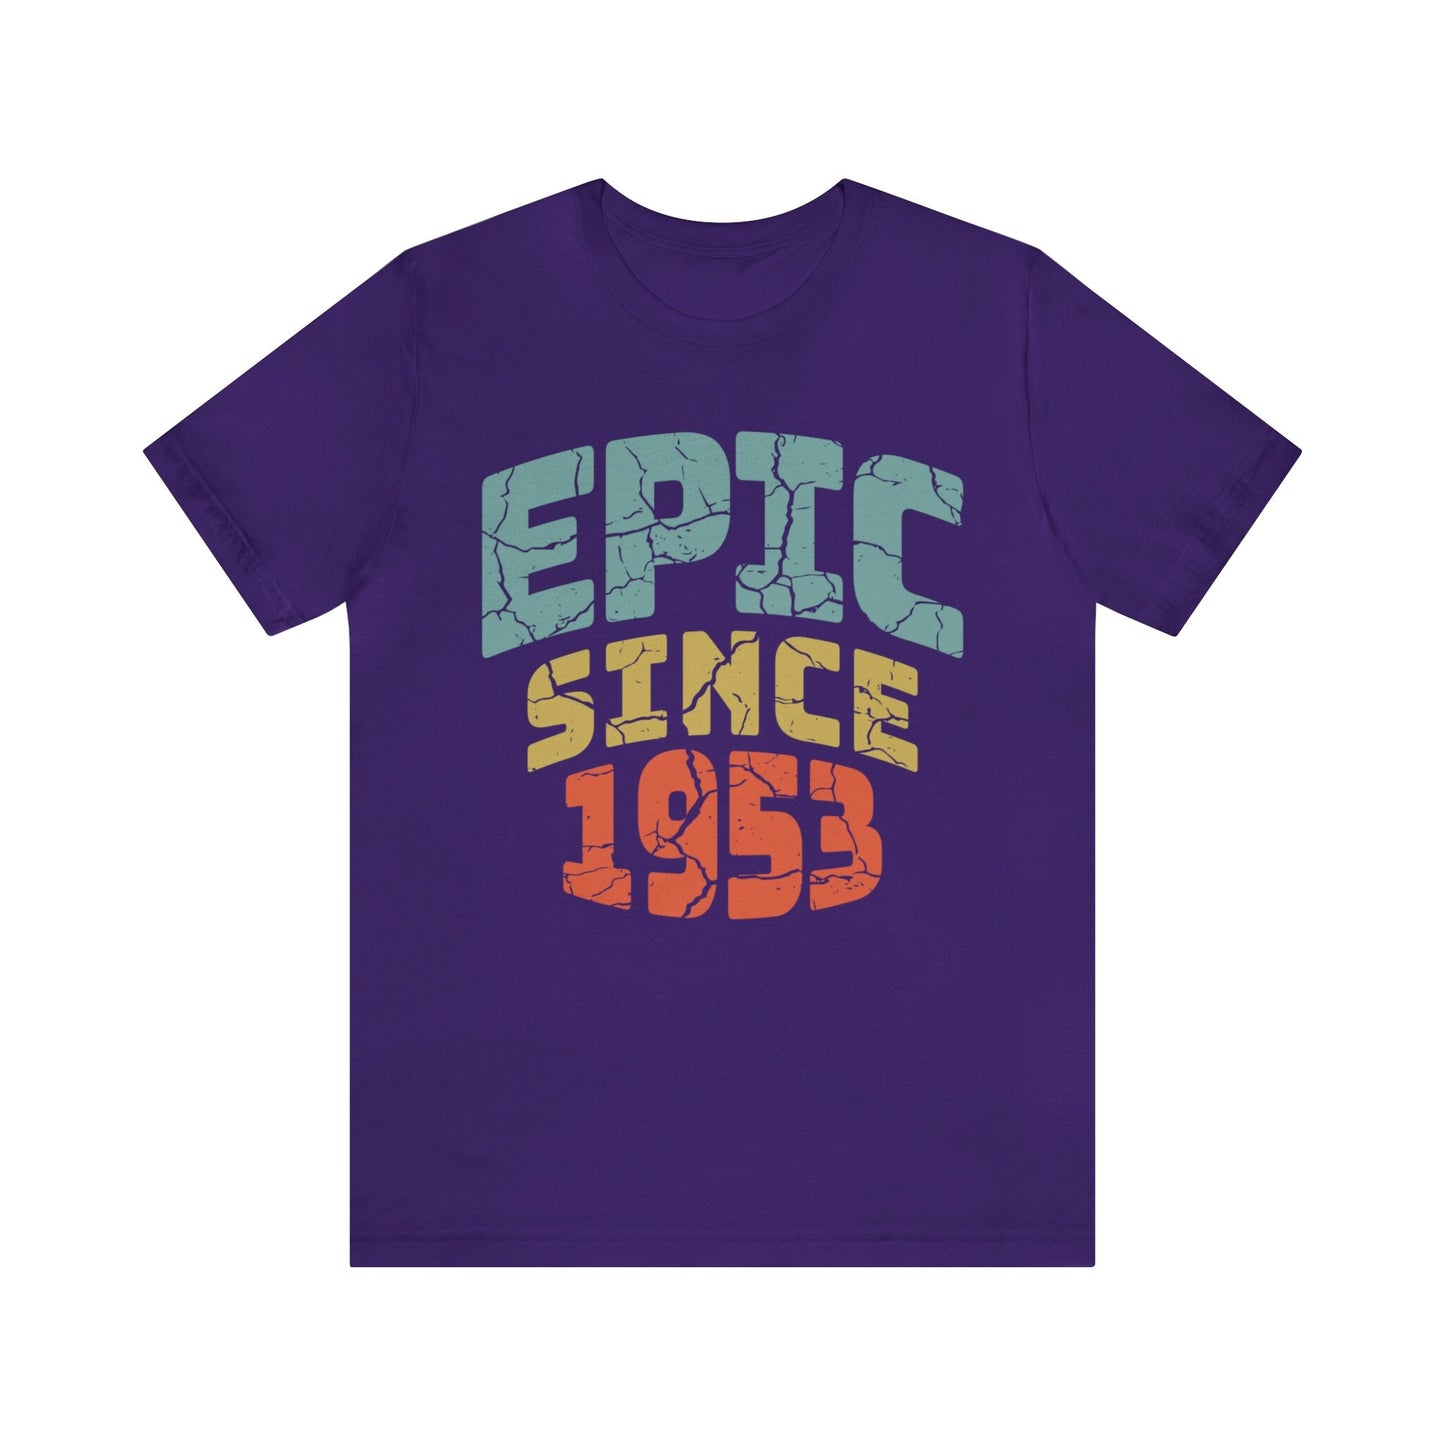 Epic Since 1953 birthday shirt for Men or Husband, Vintage Gift t-shirt for dad or father